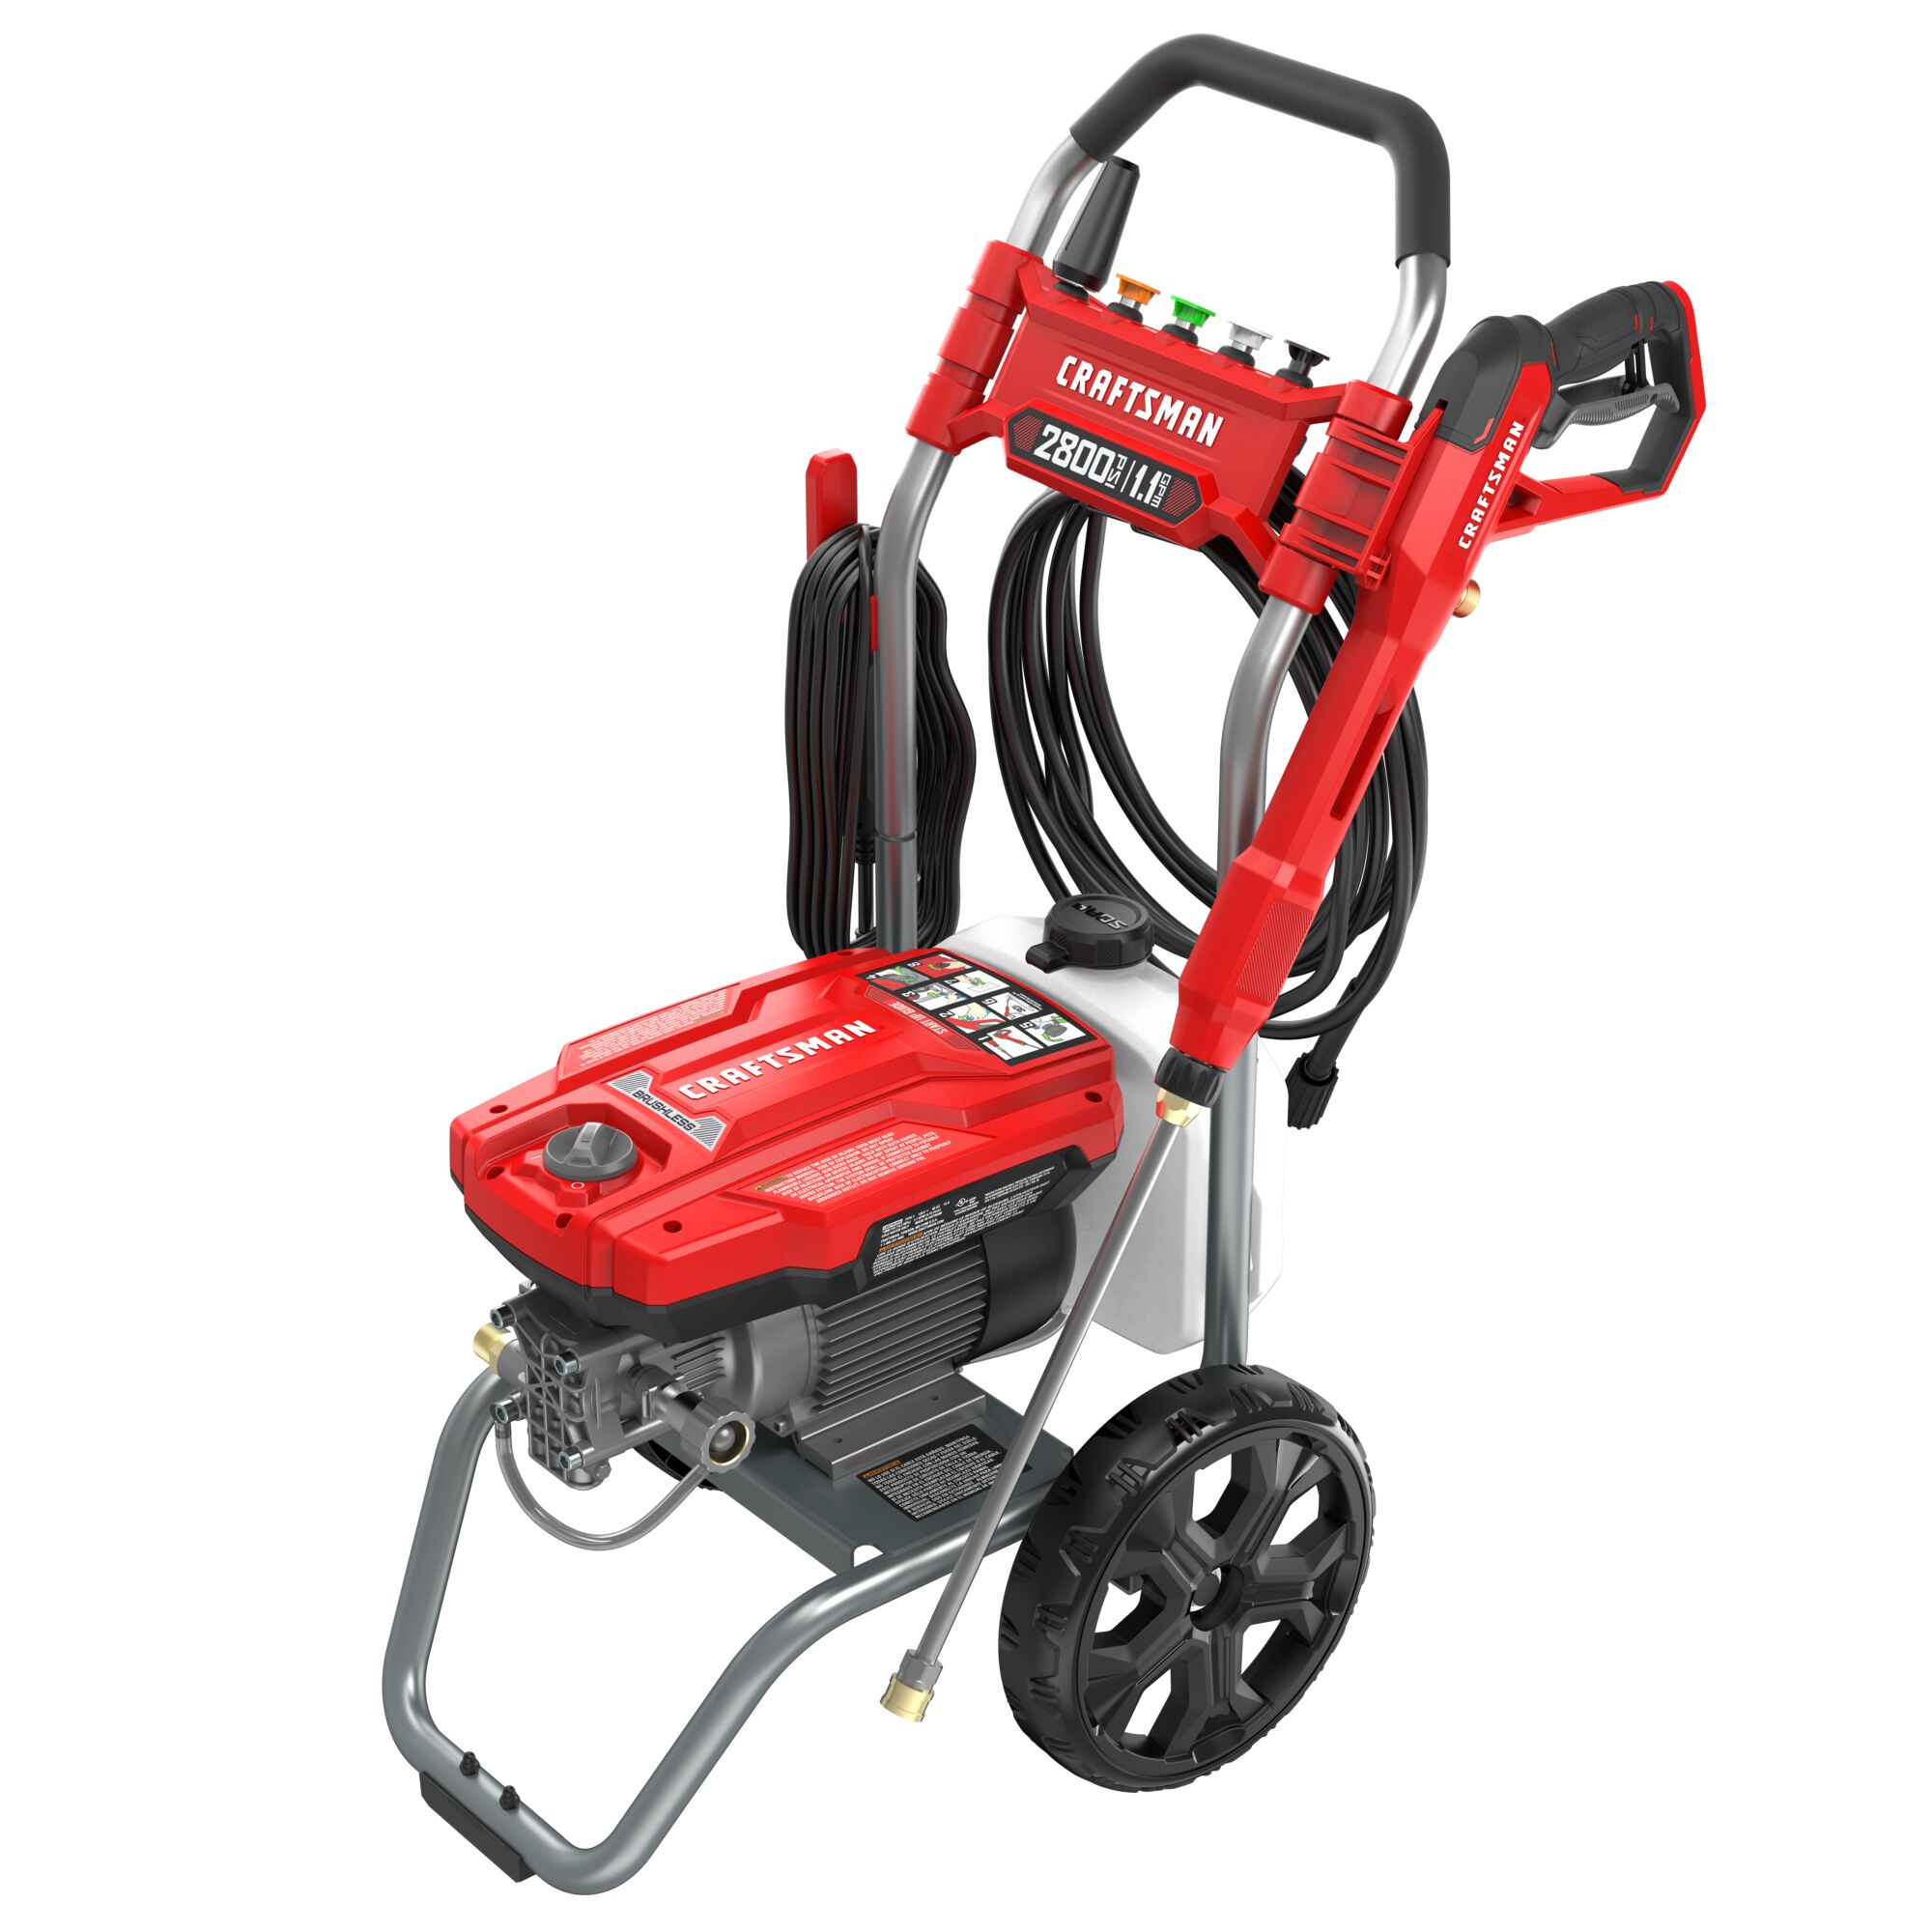 CRAFTSMAN 2800 PSI Cold Water Pressure Washer on white background